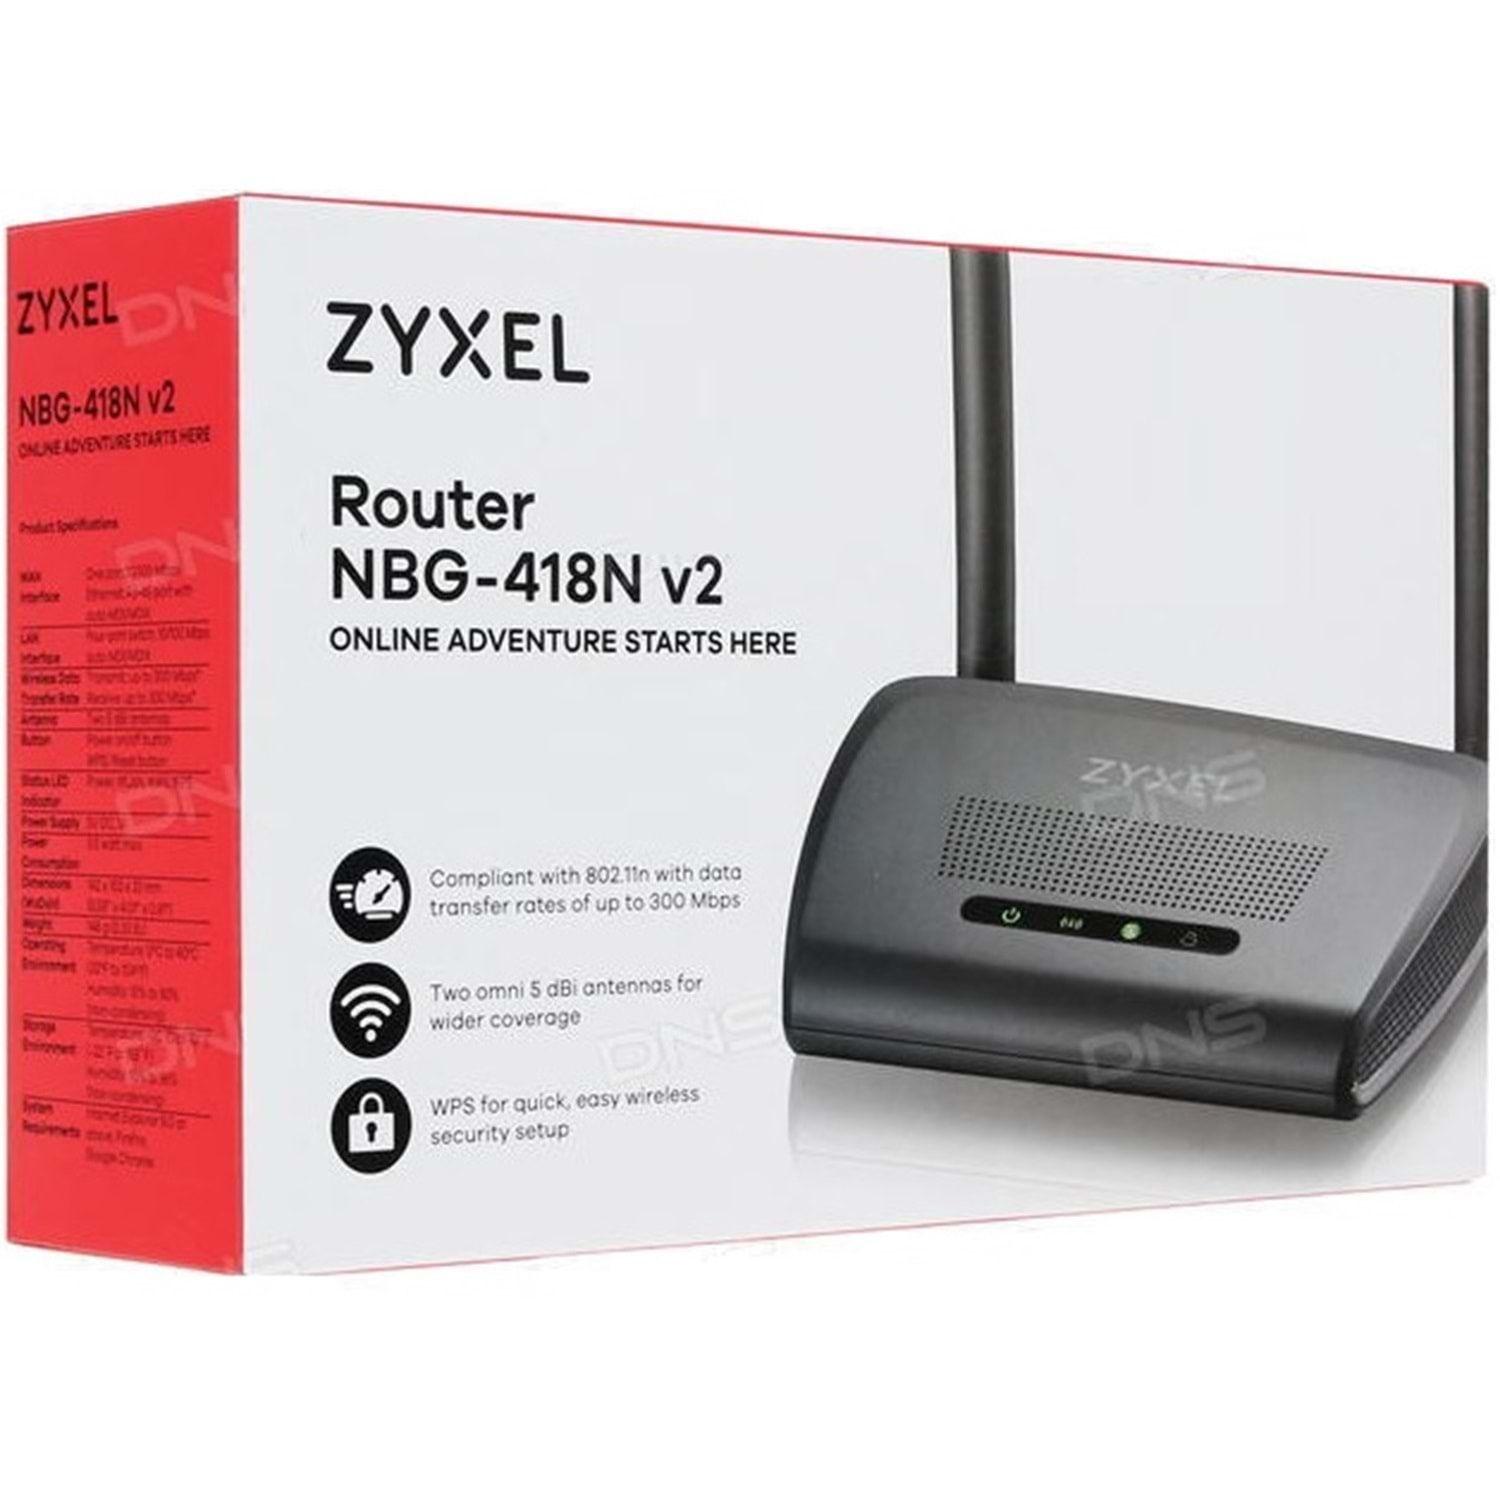 WiFi router 2.4ghz